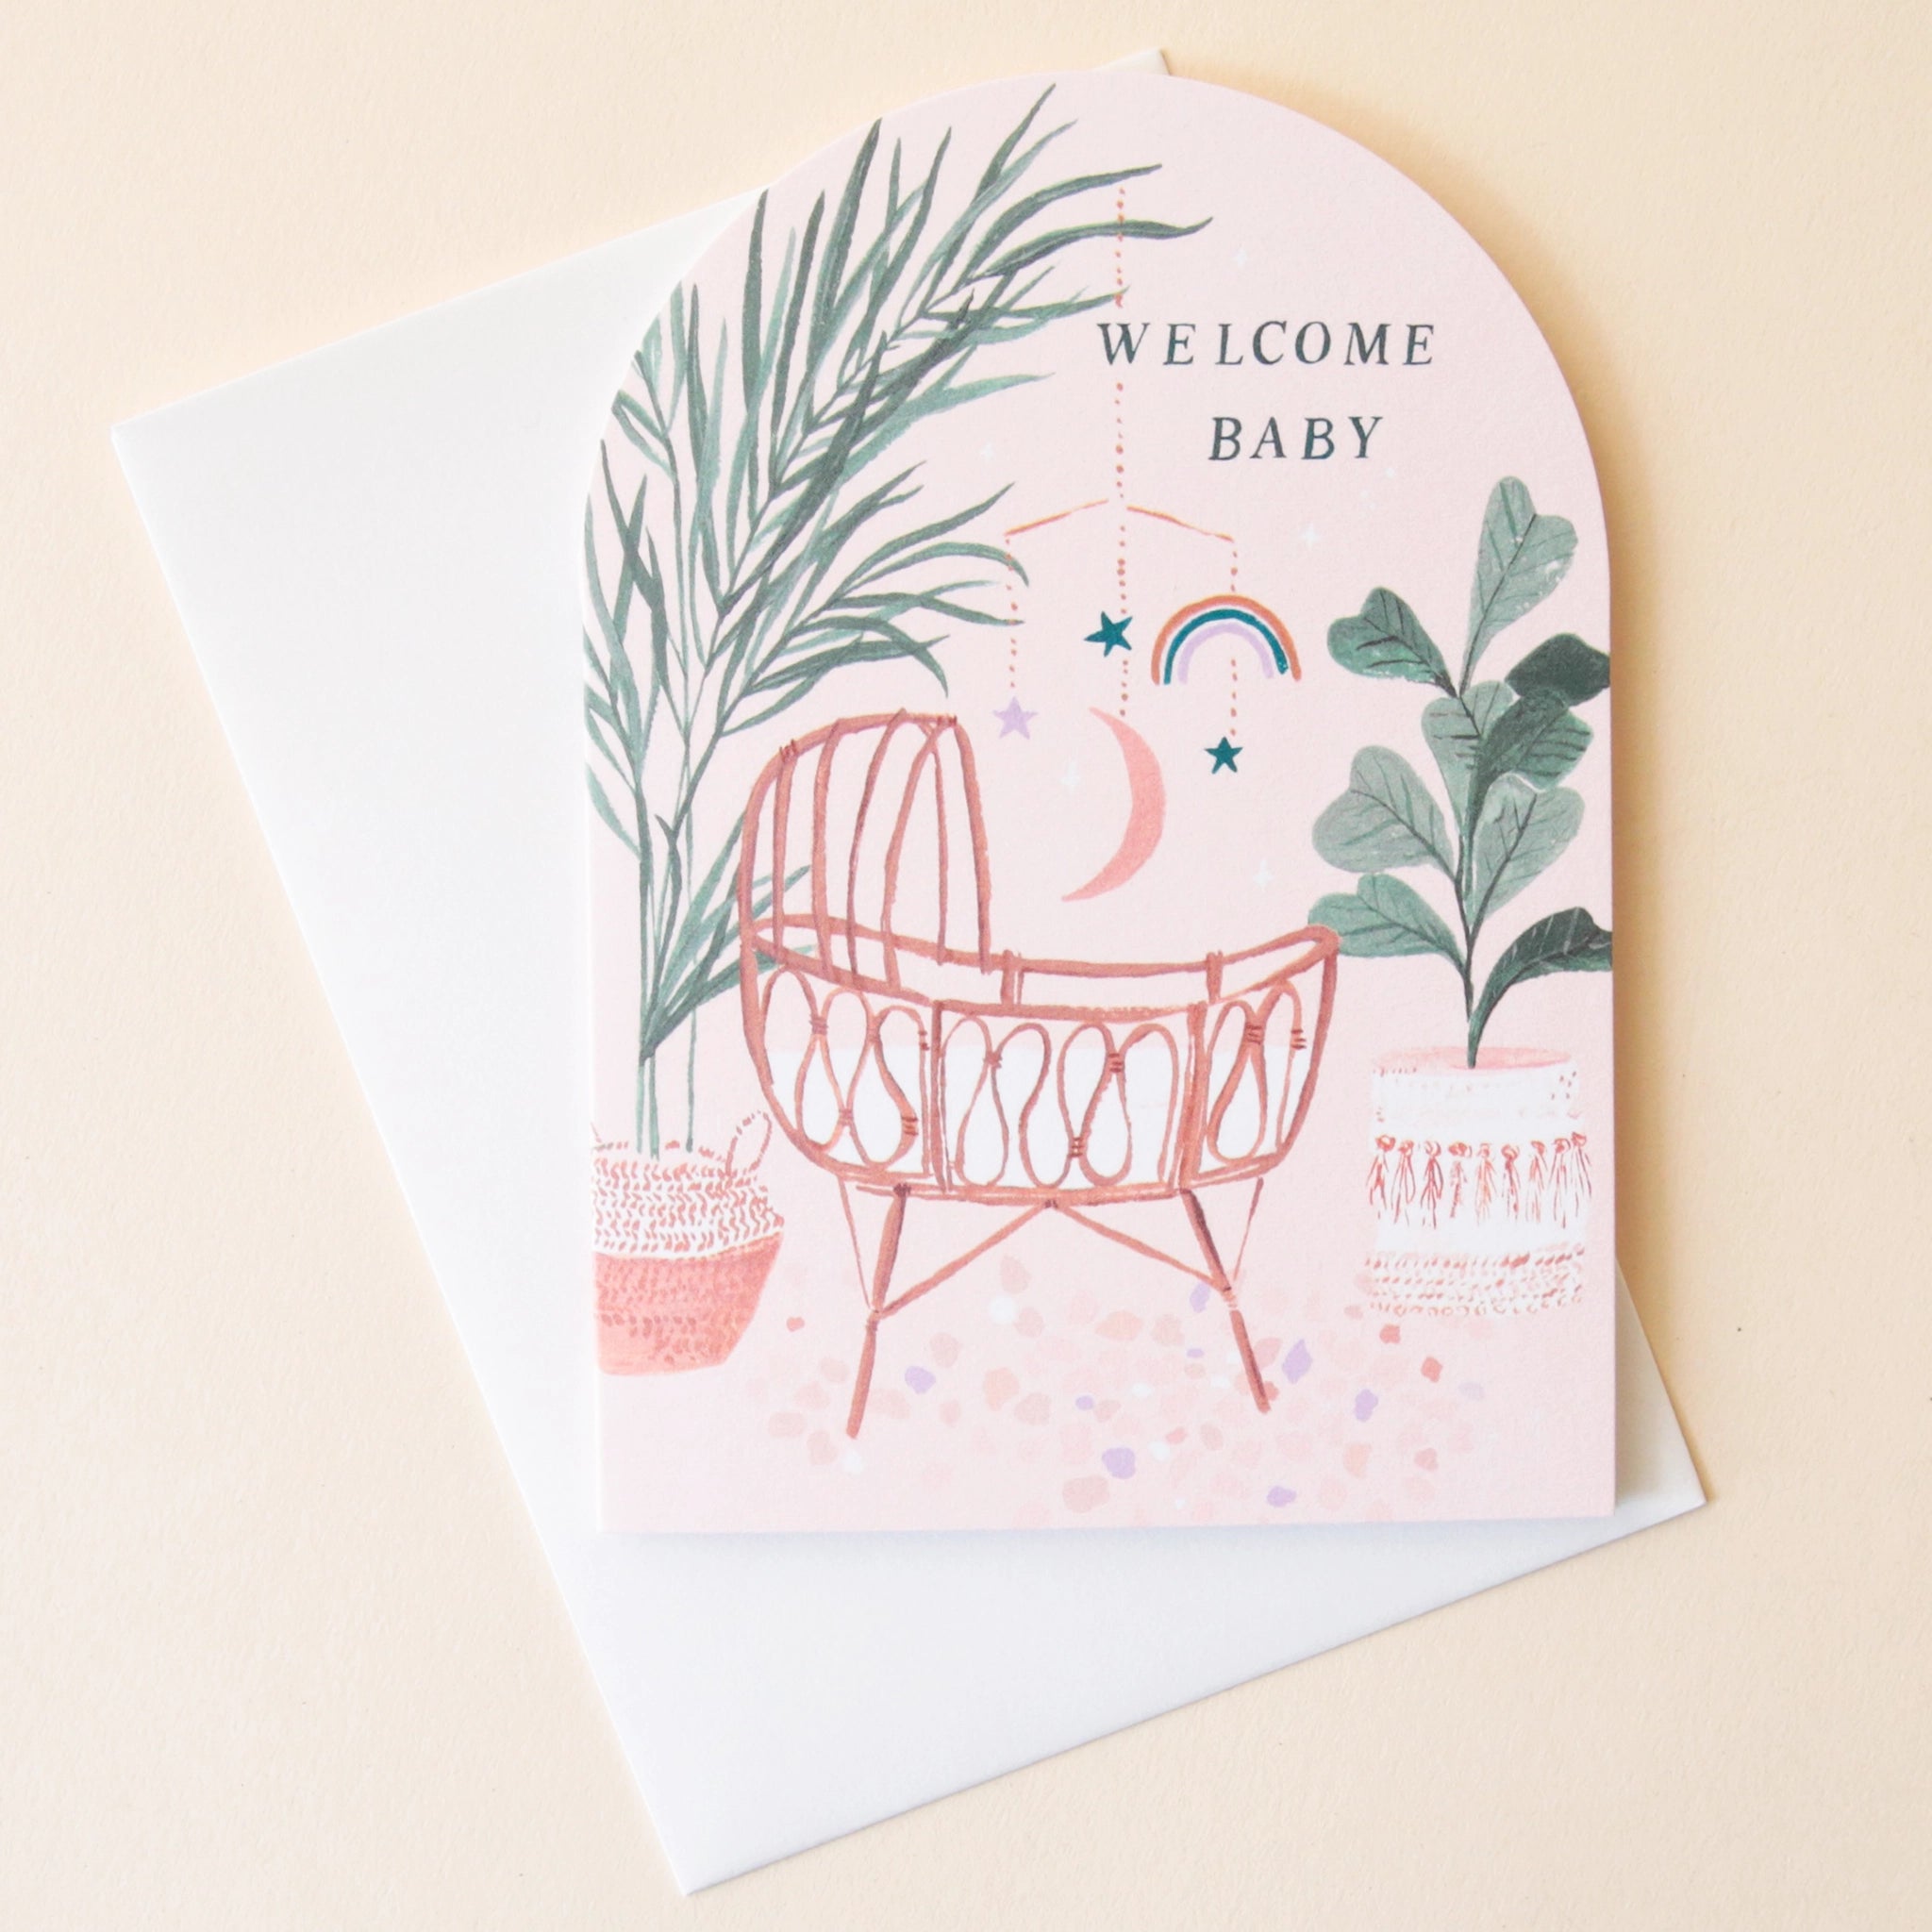 An arched greeting card with a sunset desert color pallet along with an illustration of a woven rattan baby's crib along with bohemian illustrations of lush natural foliage, bamboo, palm trees, and dried flowers and text at the top that reads, "Welcome Baby" in black letters.